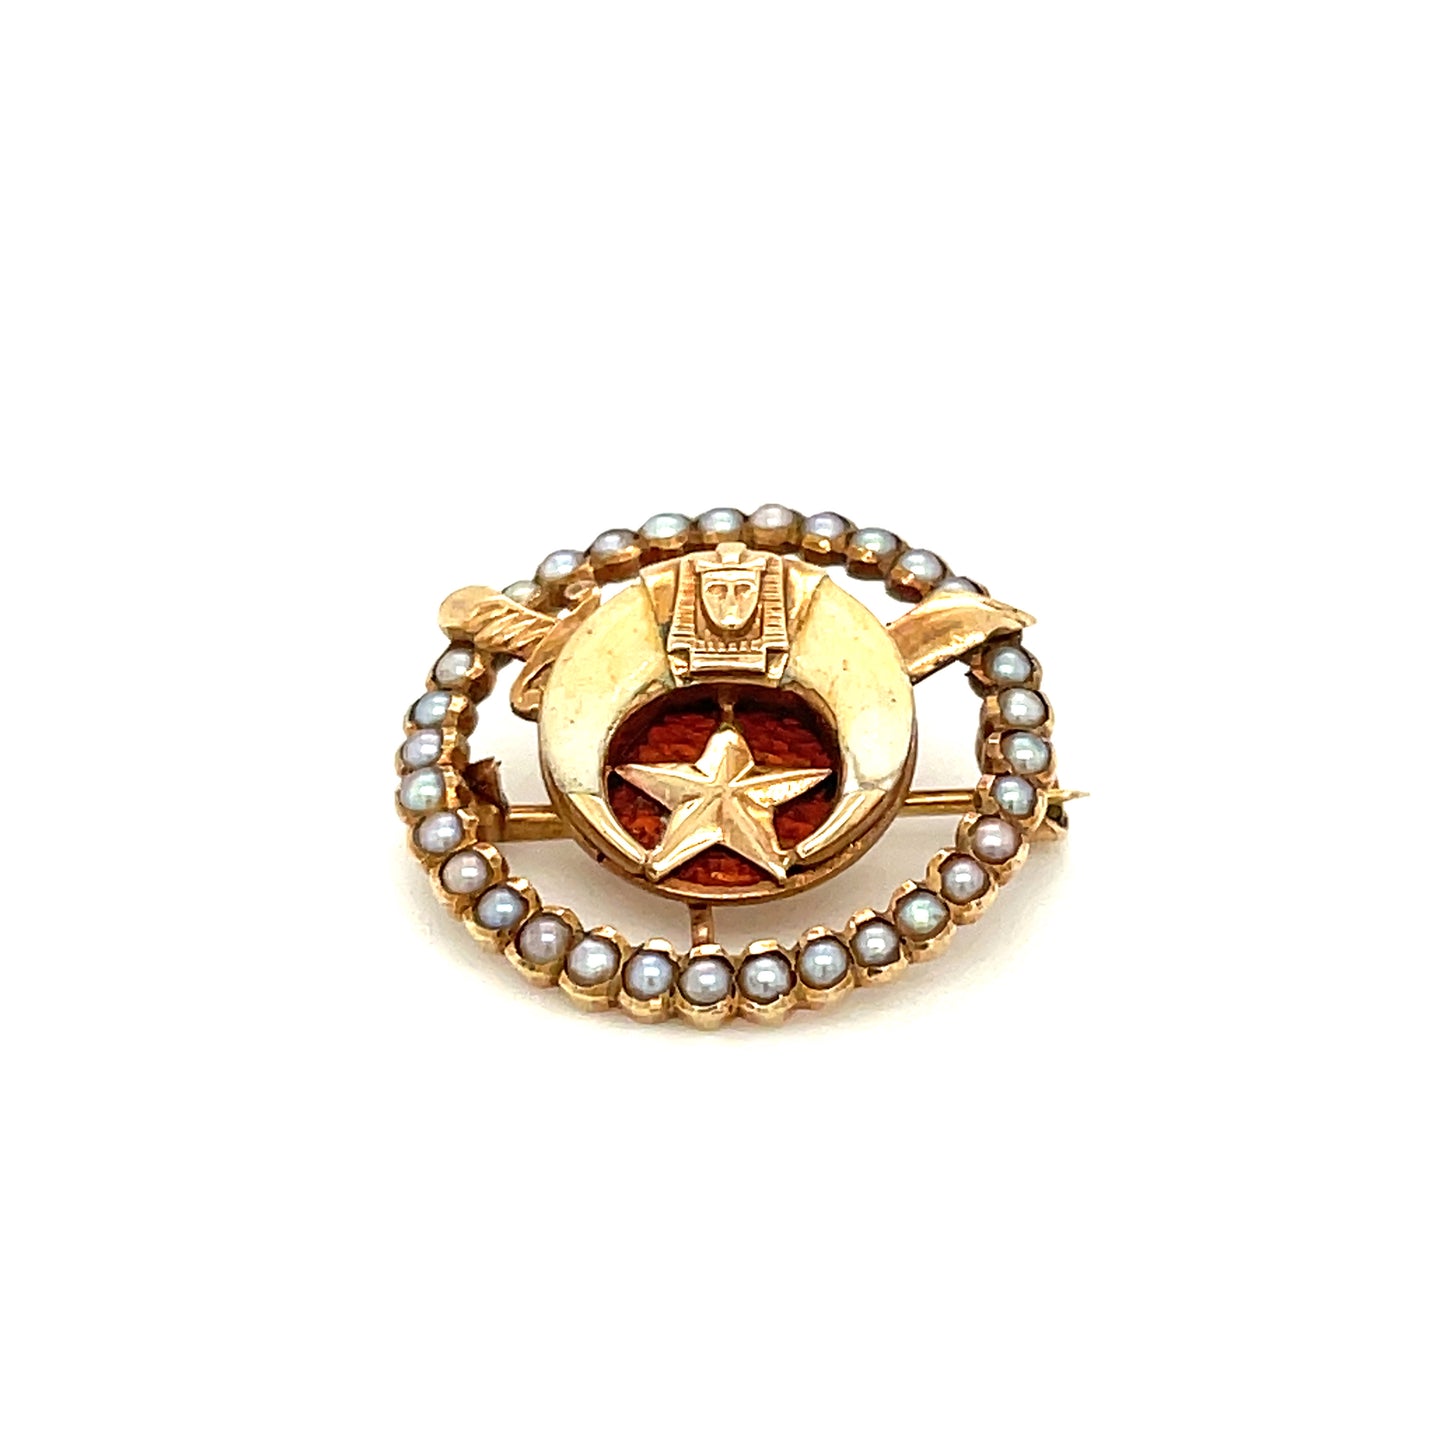 Antique Woman’s Egyptian Revival Masonic Shriners Eastern Star Pin 14k Yellow Gold 3.9g